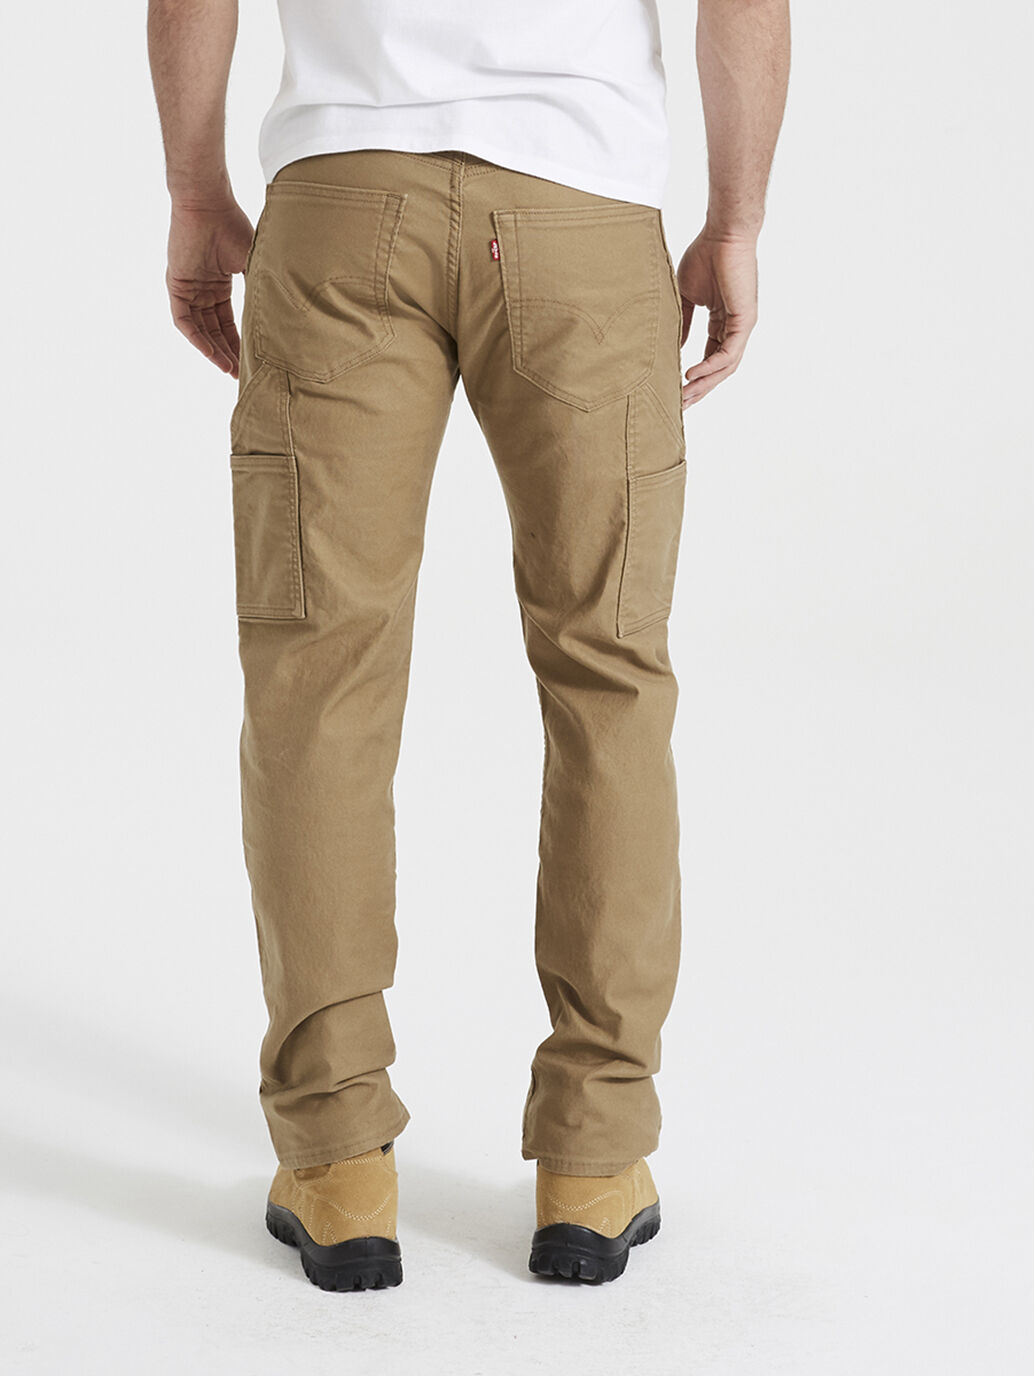 Buy LEVIS Mens Slim Fit Textured Trousers 512  Shoppers Stop